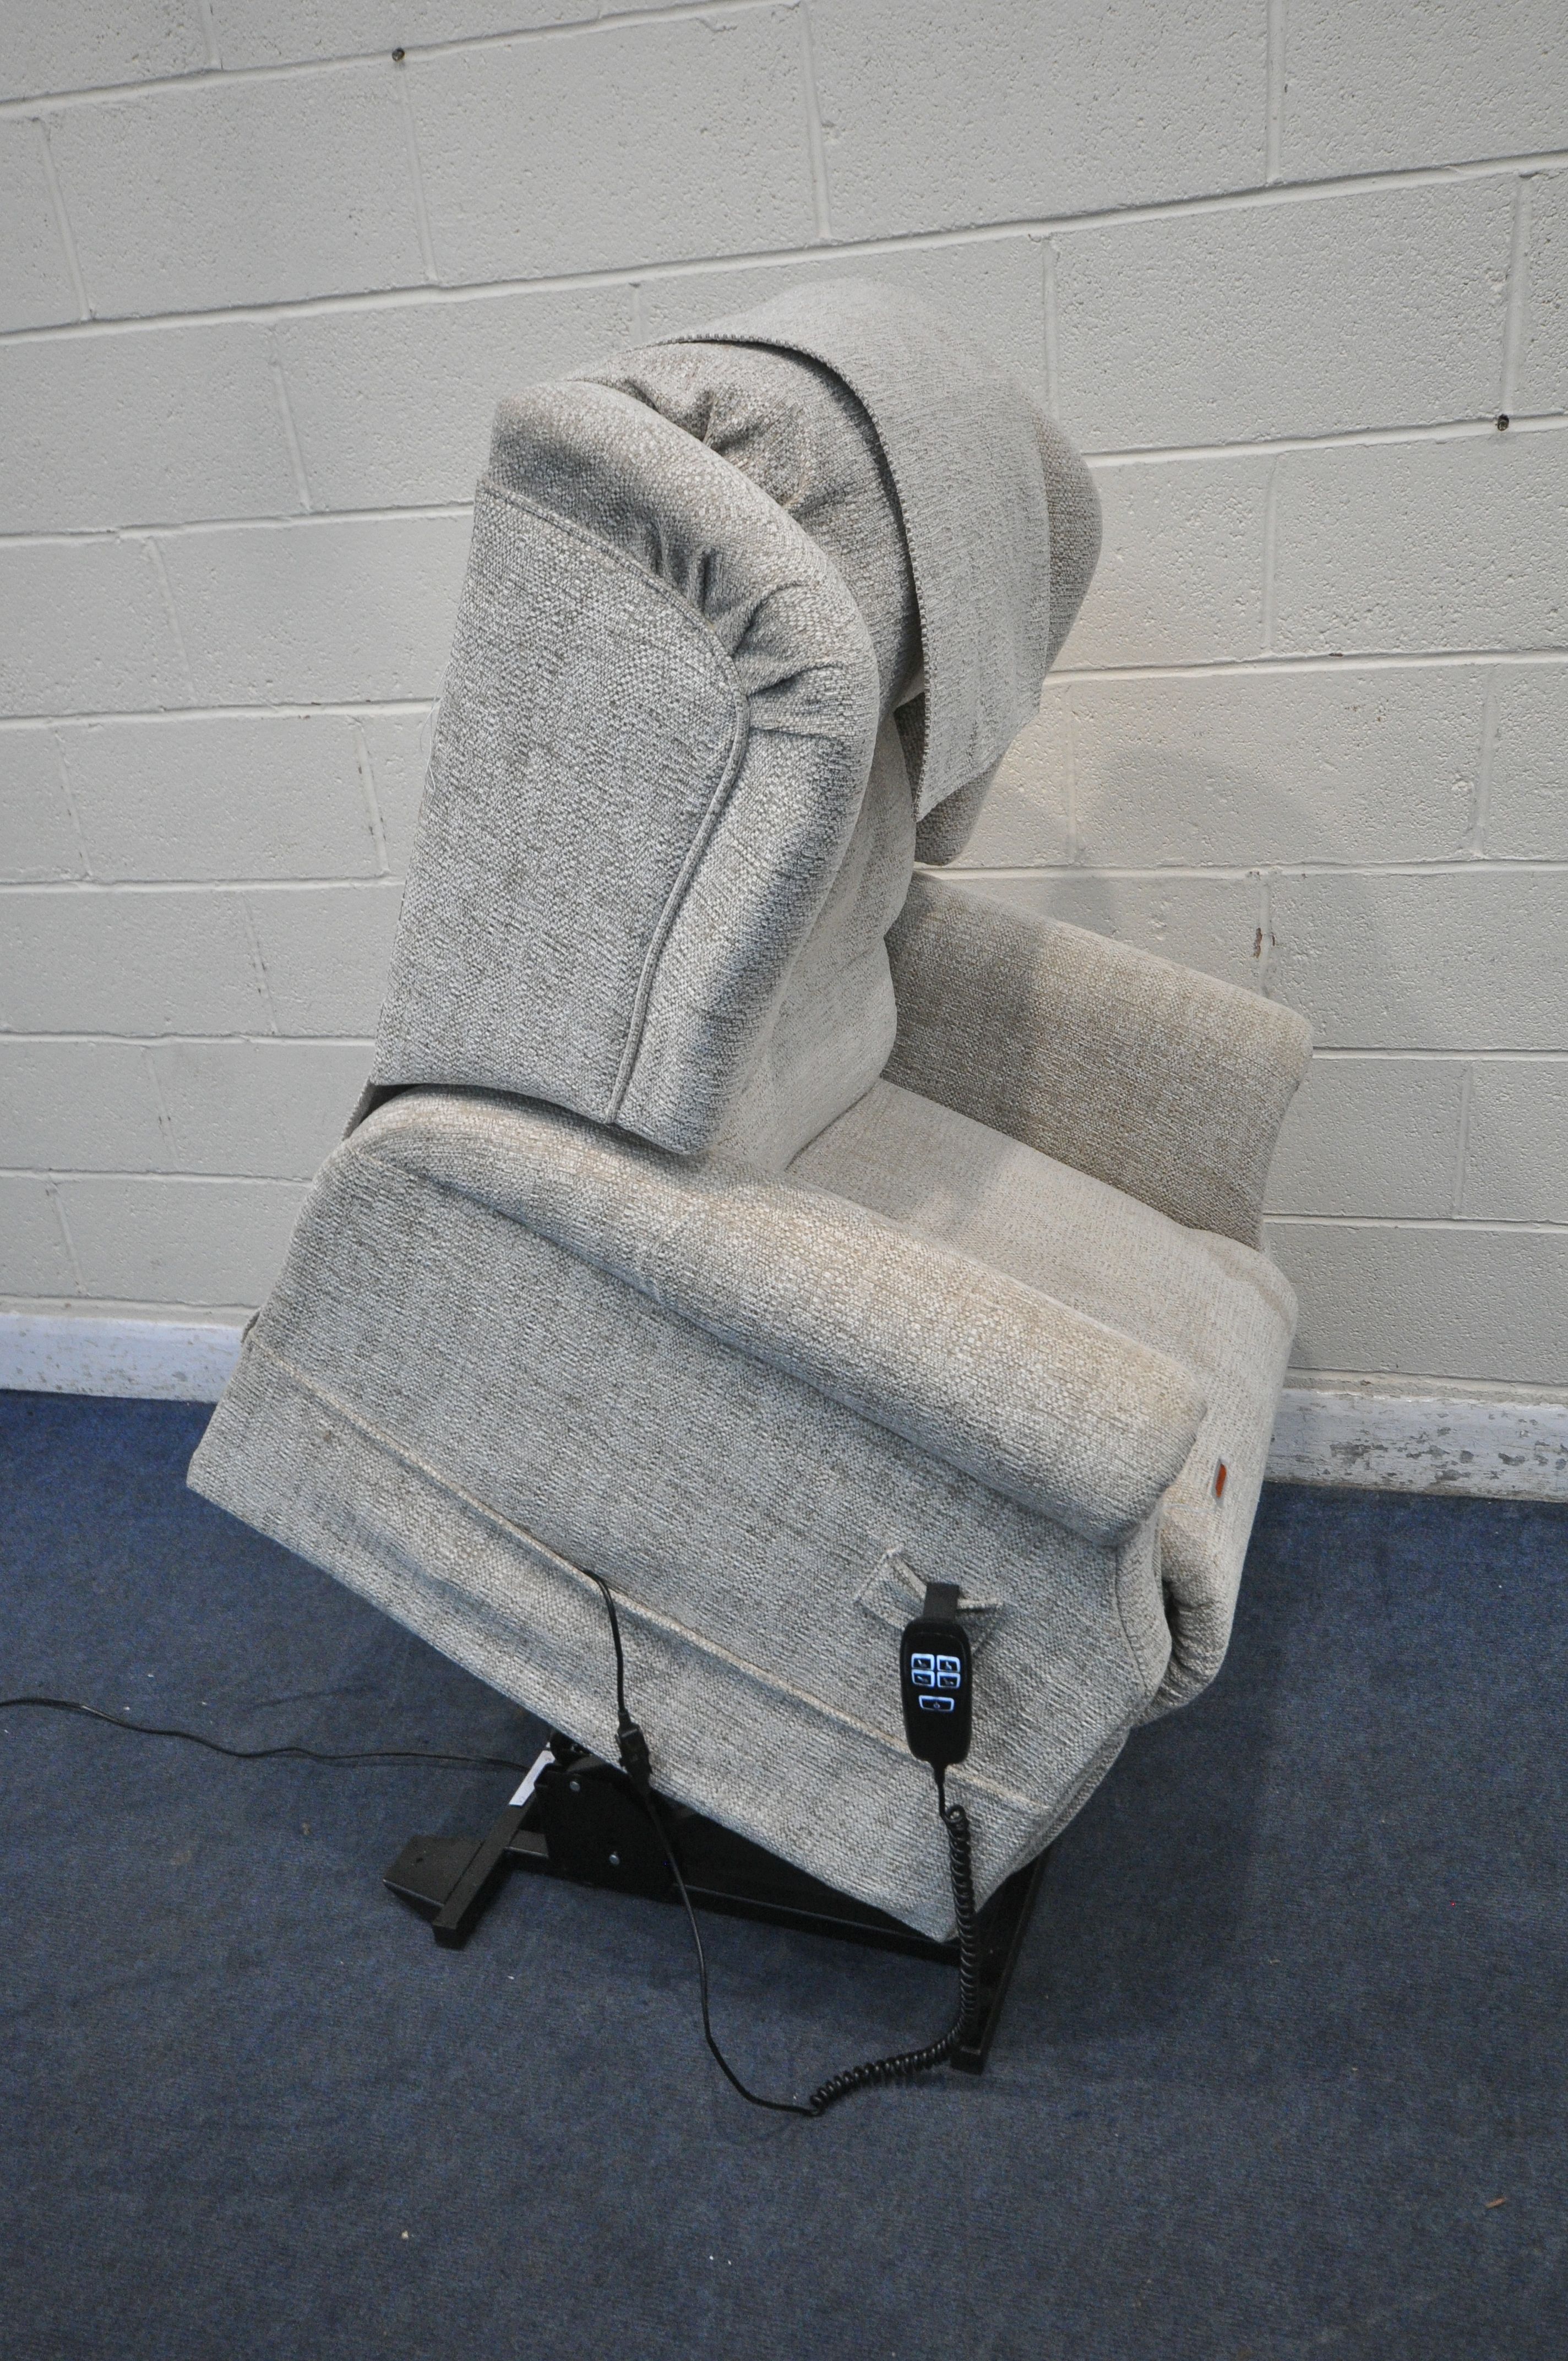 A COSI CHAIR BEIGE UPHOLSTERED ELECTRIC RISE AND RECLINE ARMCHAIR, width 80cm x depth 88cm x - Image 3 of 3